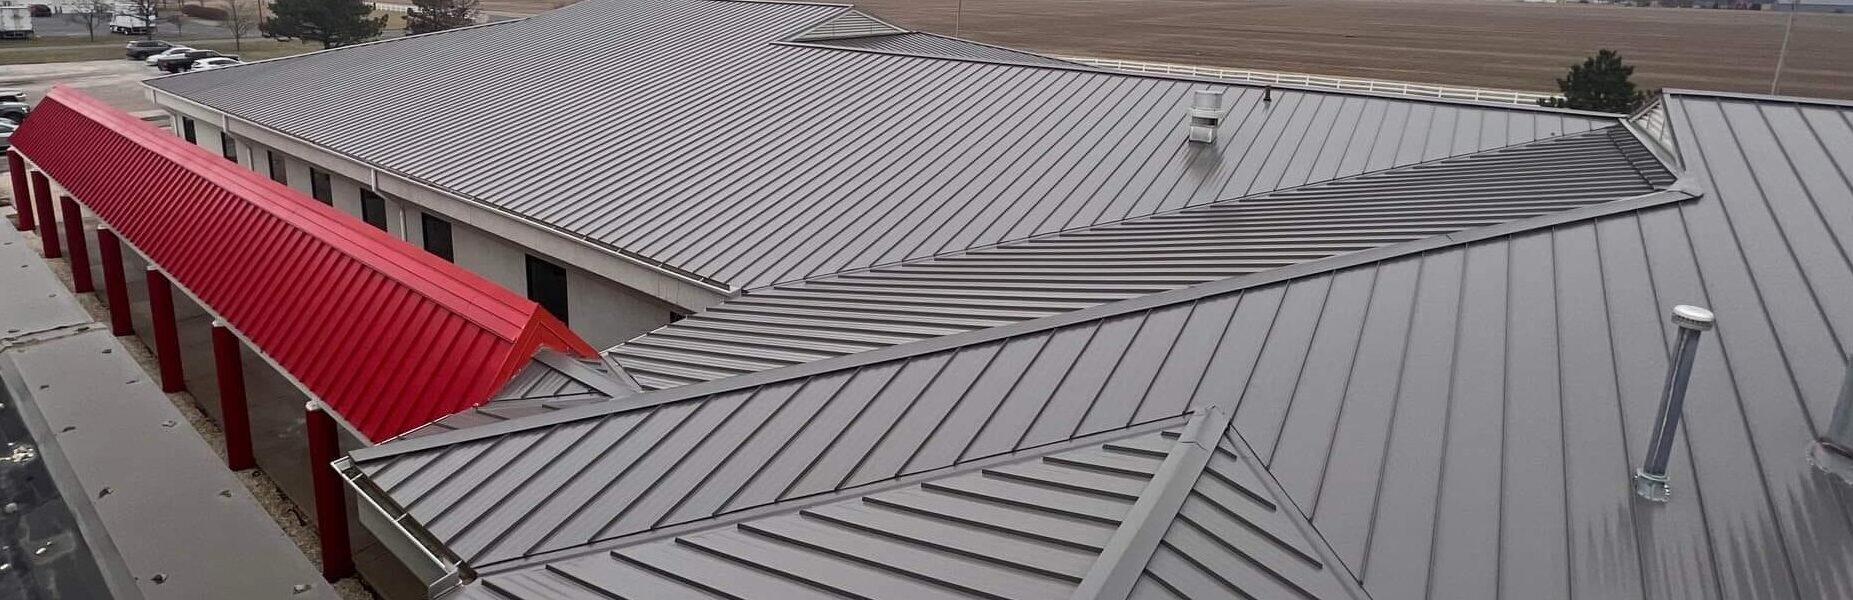 Commercial metal roofing project showcasing Shingle and Metal Roofs ability to complete large scale projects.